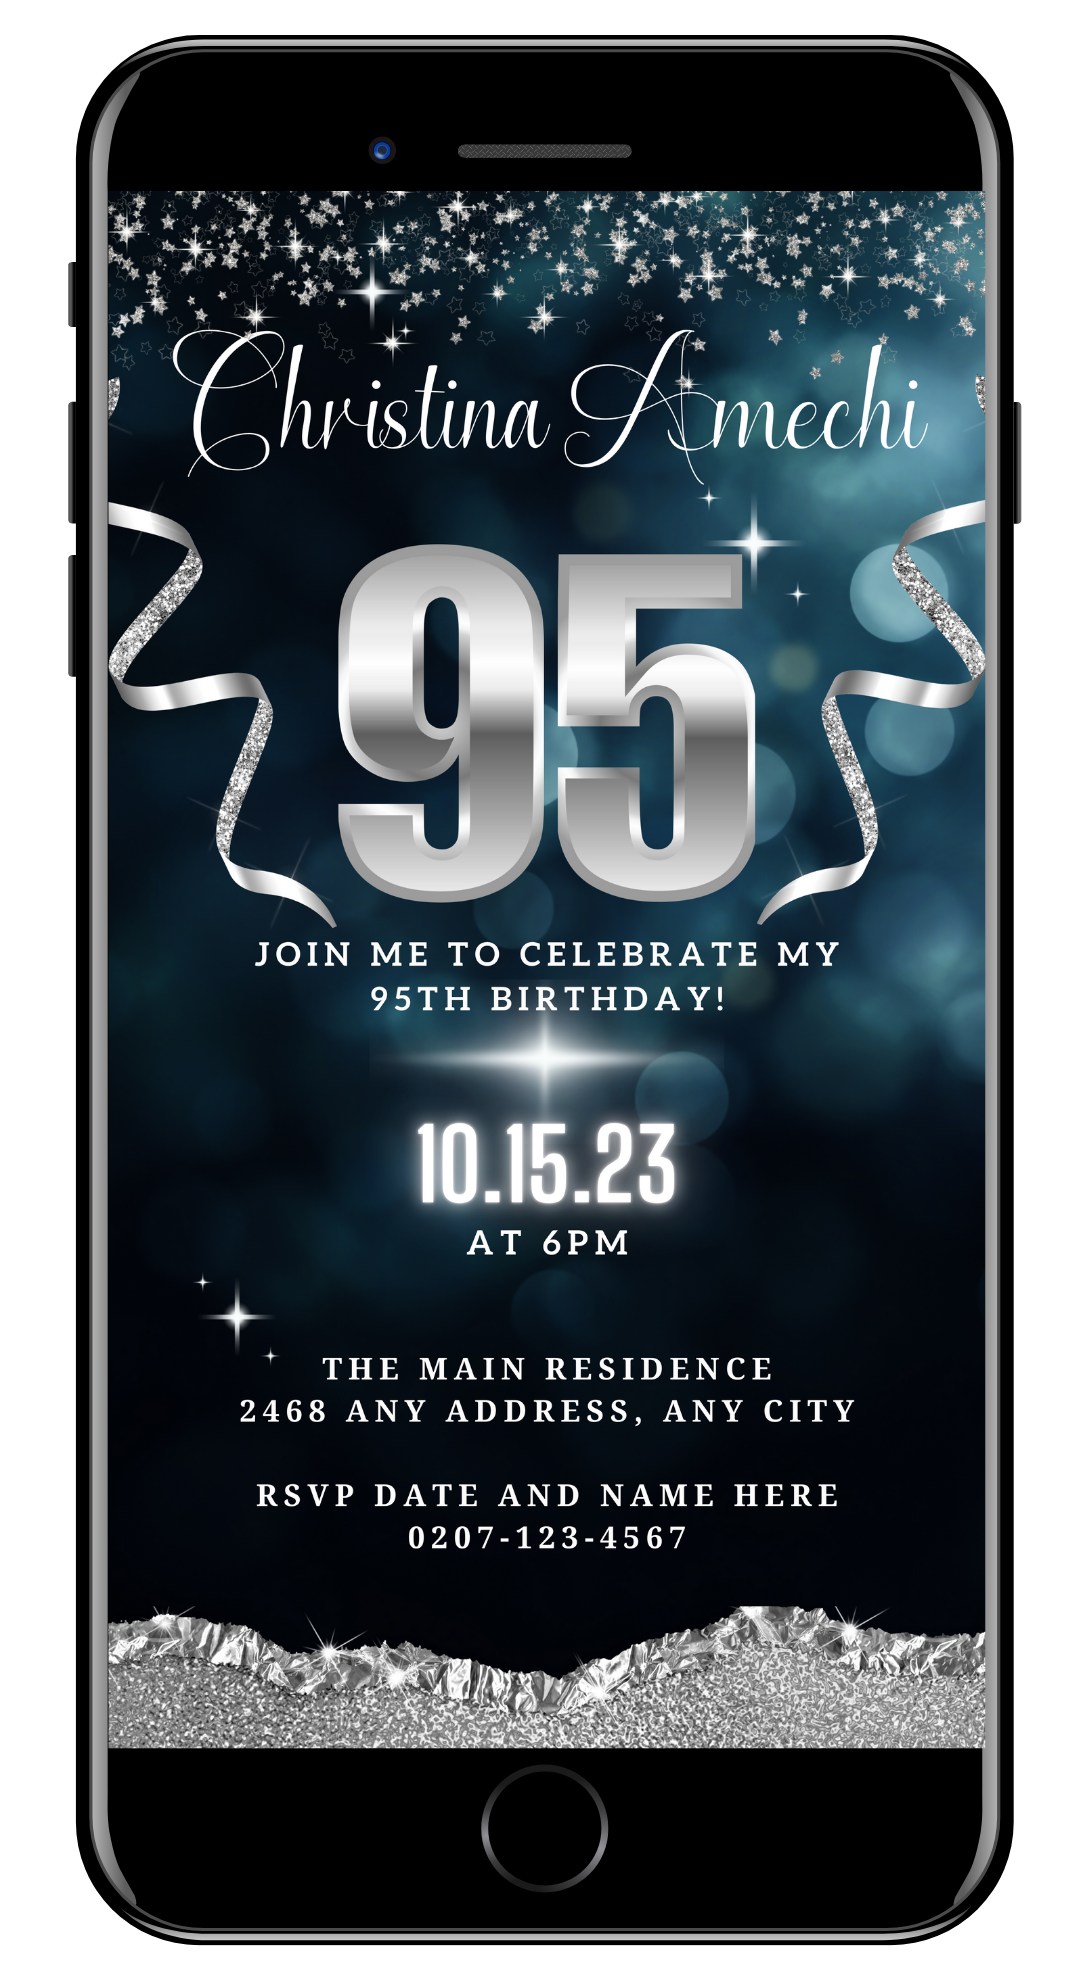 Customizable Navy Blue Silver Glitter 95th Birthday Evite for smartphones, featuring editable text and design elements, downloadable via Canva for digital sharing.